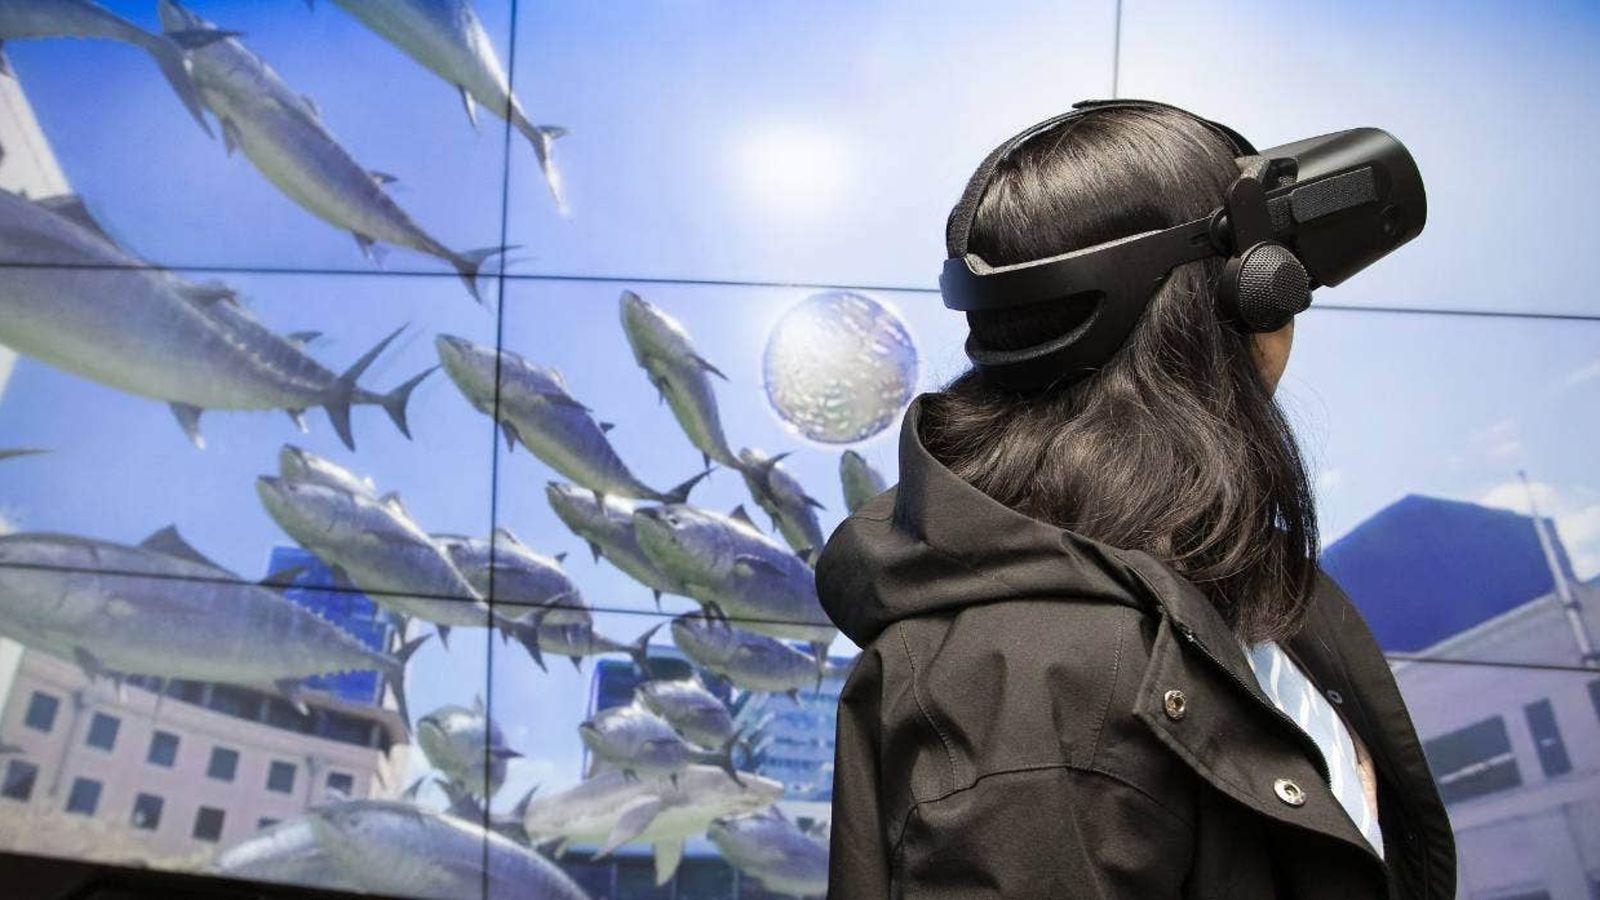 Woman wearing VR headset, screen behind her shows fish flying in sky